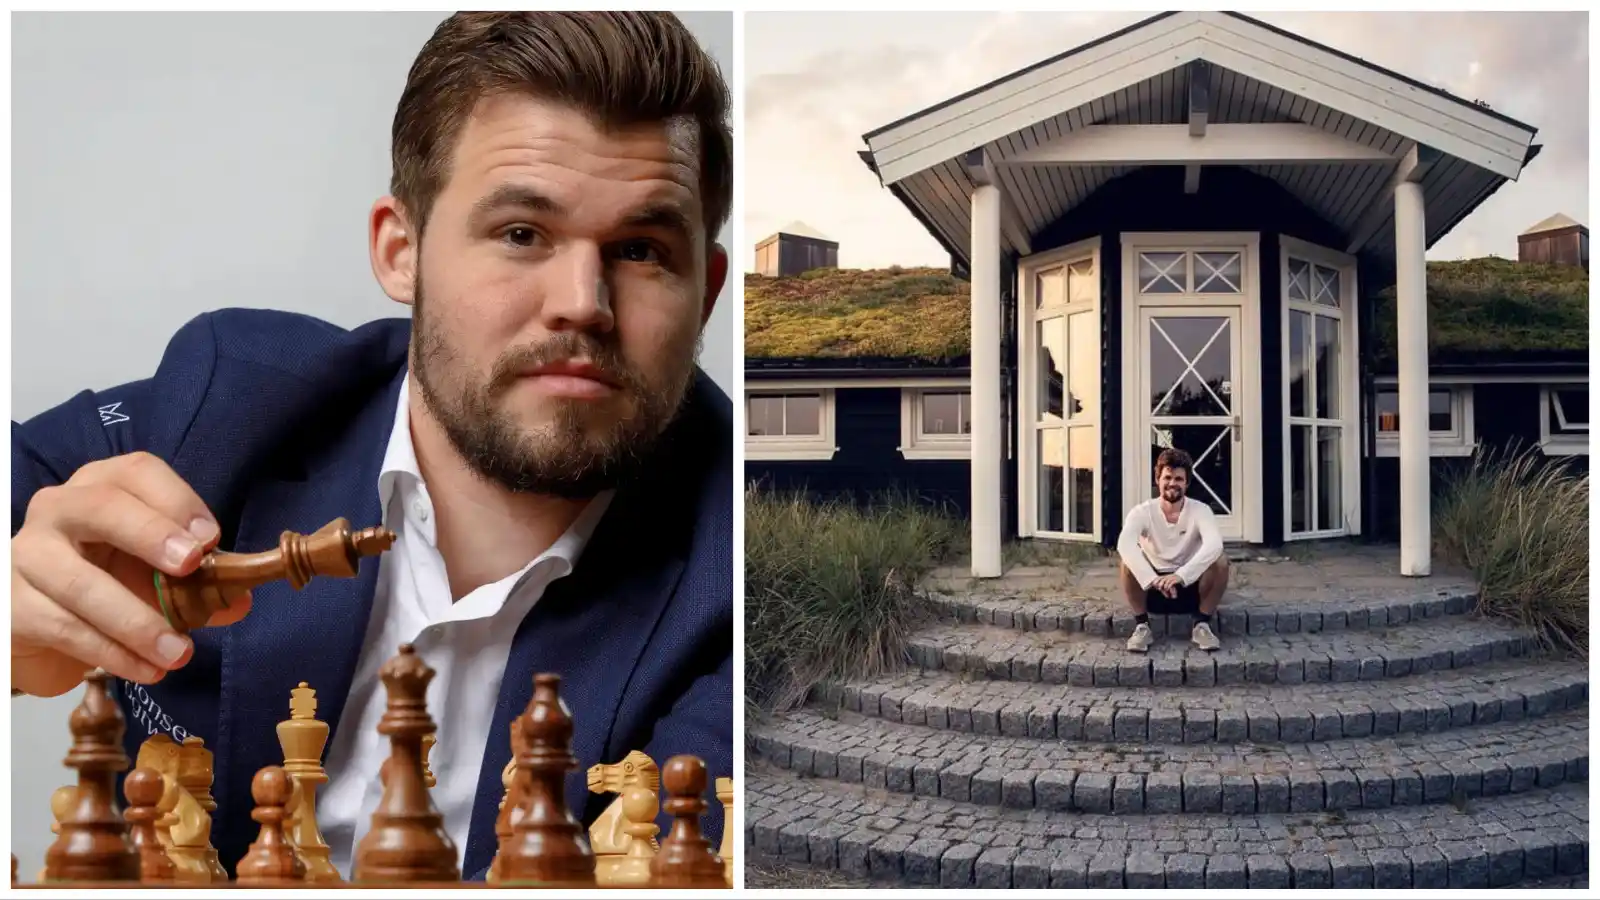 Magnus Carlsen net worth, age, career, wife, biography, what is the IQ of  Magnus Carlsen?